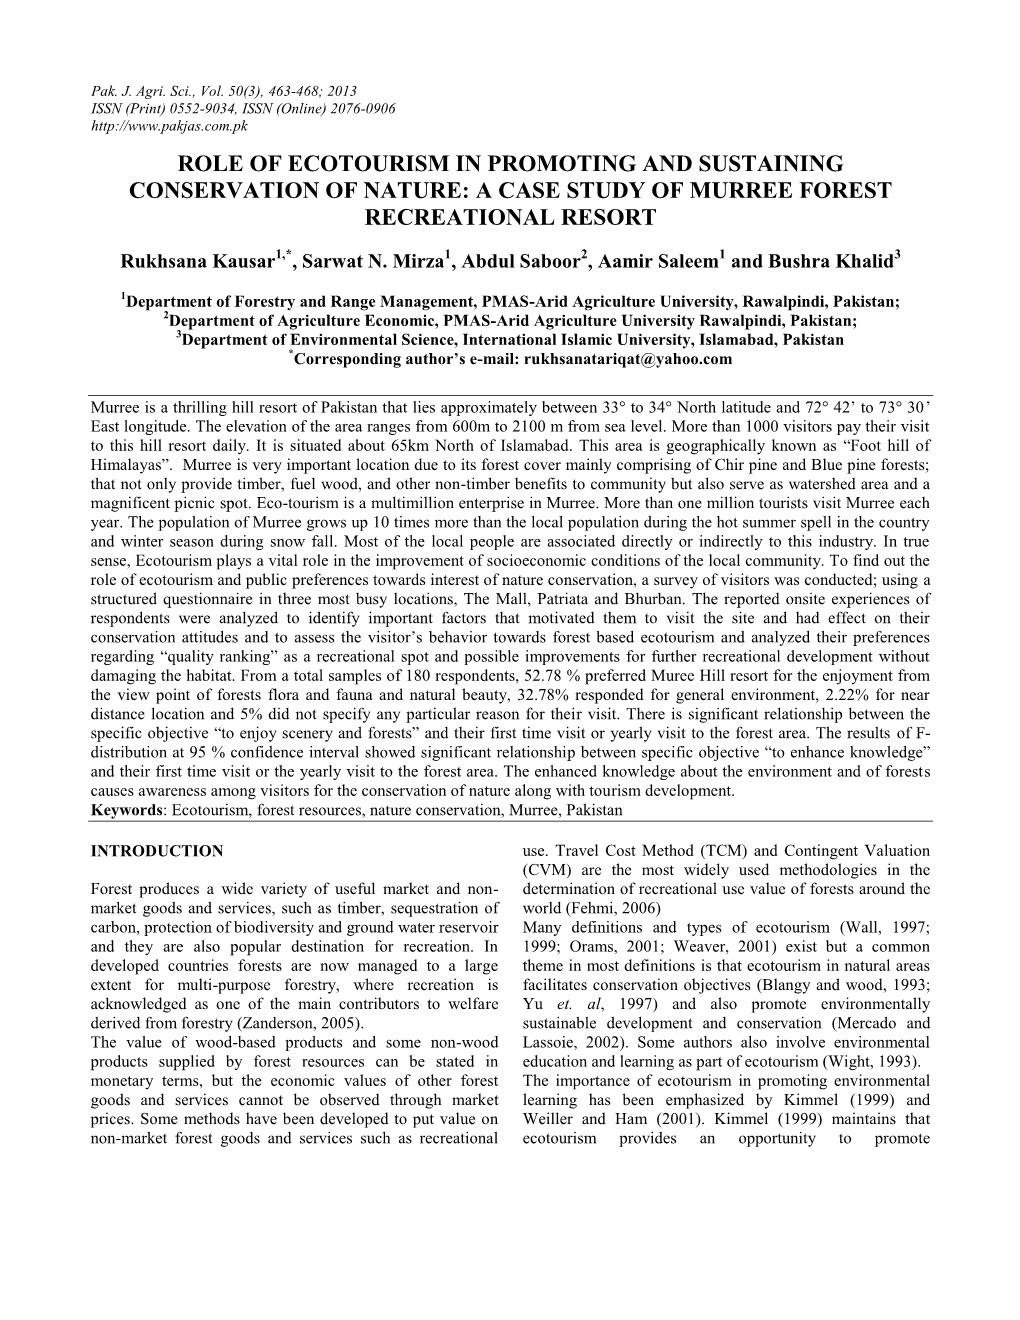 Role of Ecotourism in Promoting and Sustaining Conservation of Nature: a Case Study of Murree Forest Recreational Resort